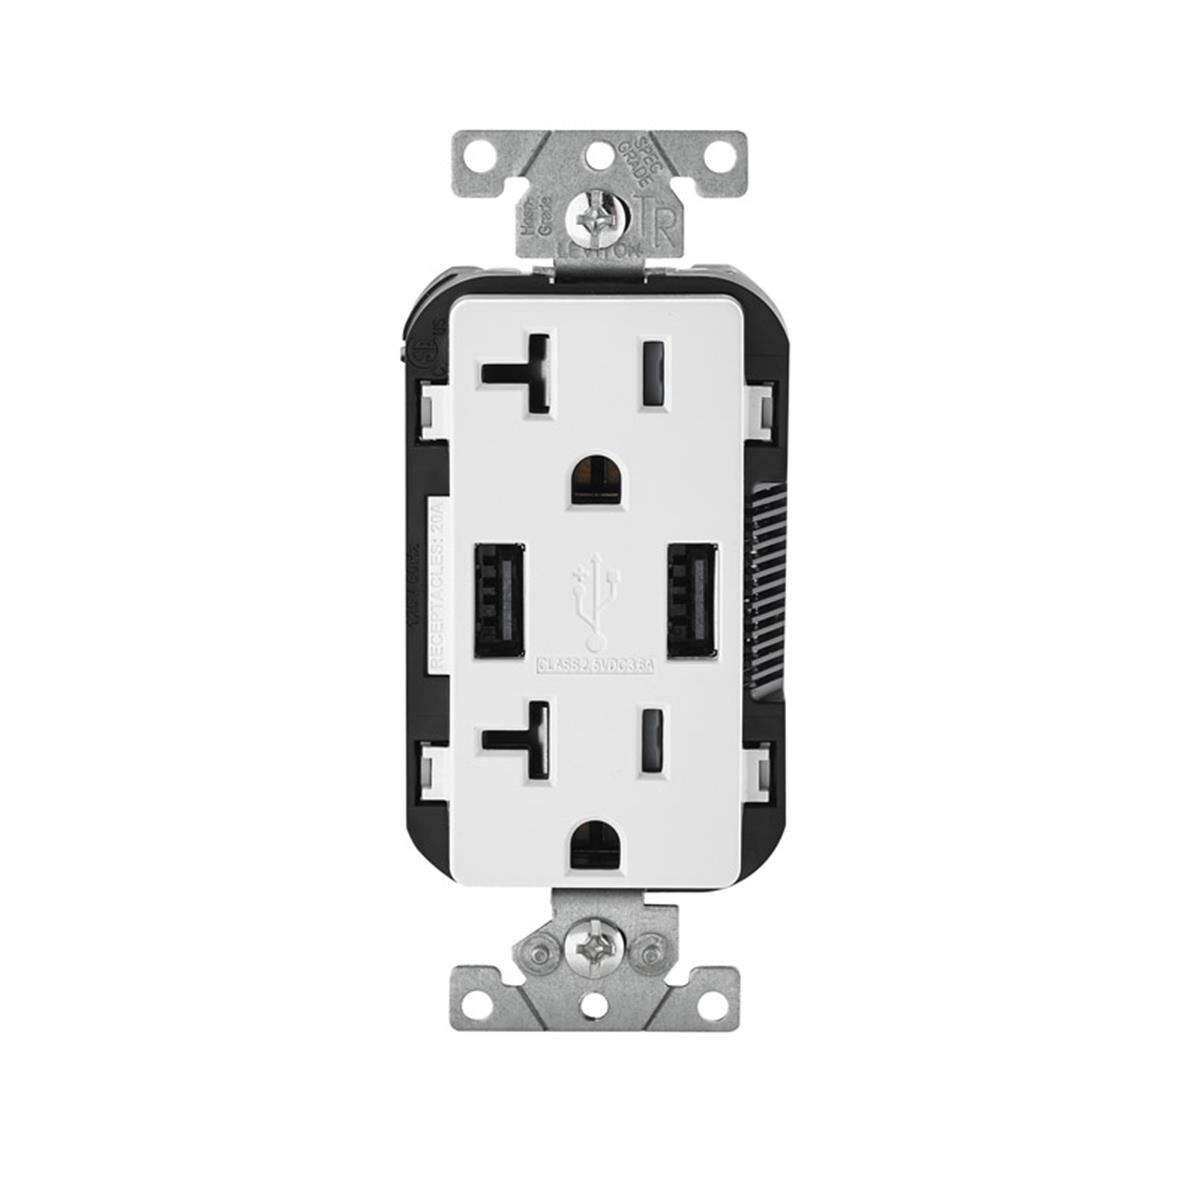 Leviton 3809480 125v, 20a Decora Outlet & 5-20r Usb Charger - White